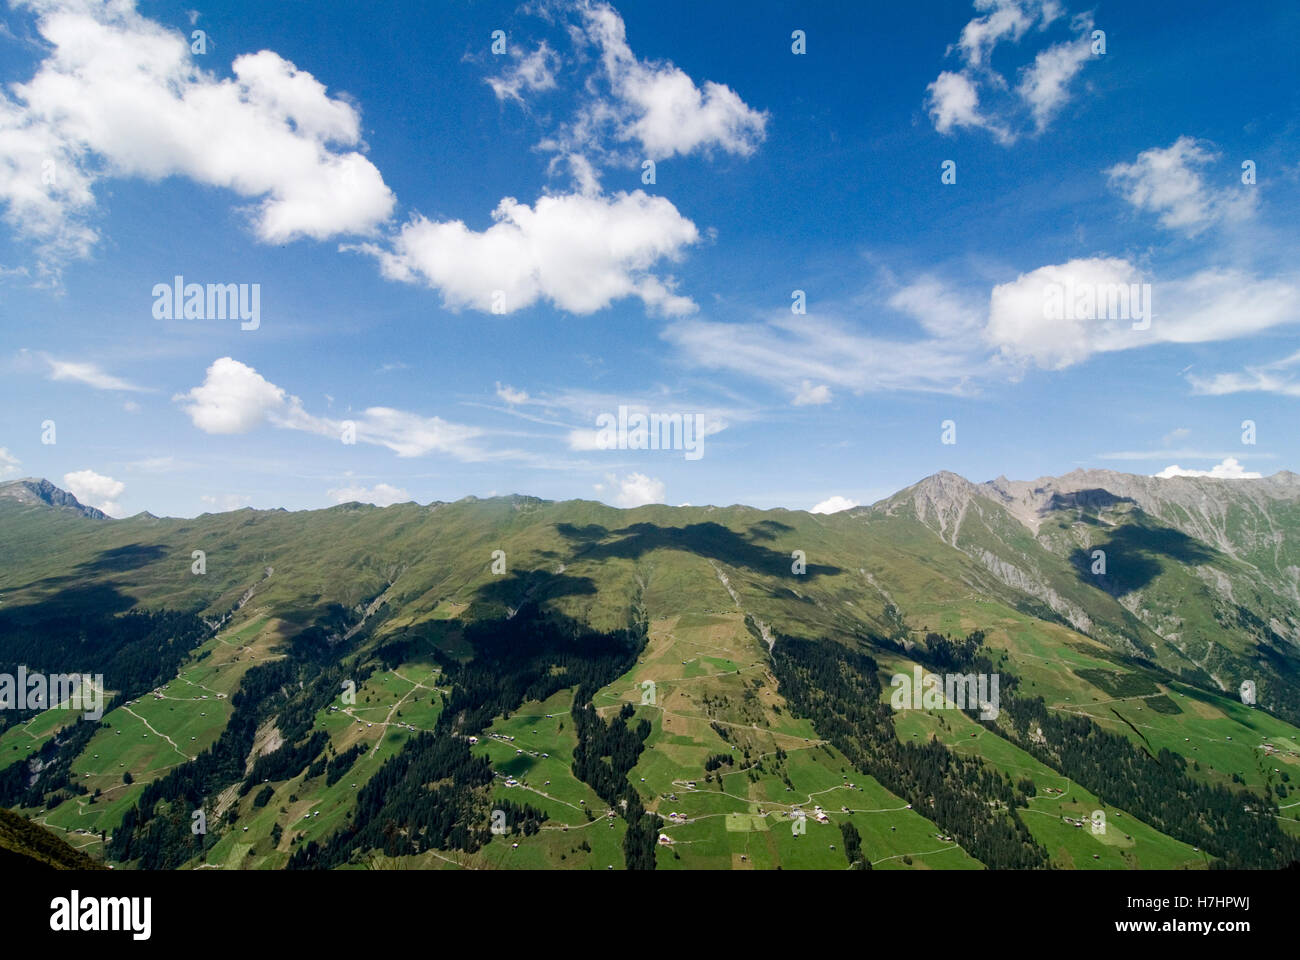 View from Glaser Grat ridge over the Safien Valley in the canton of Grisons, Switzerland, Europe Stock Photo